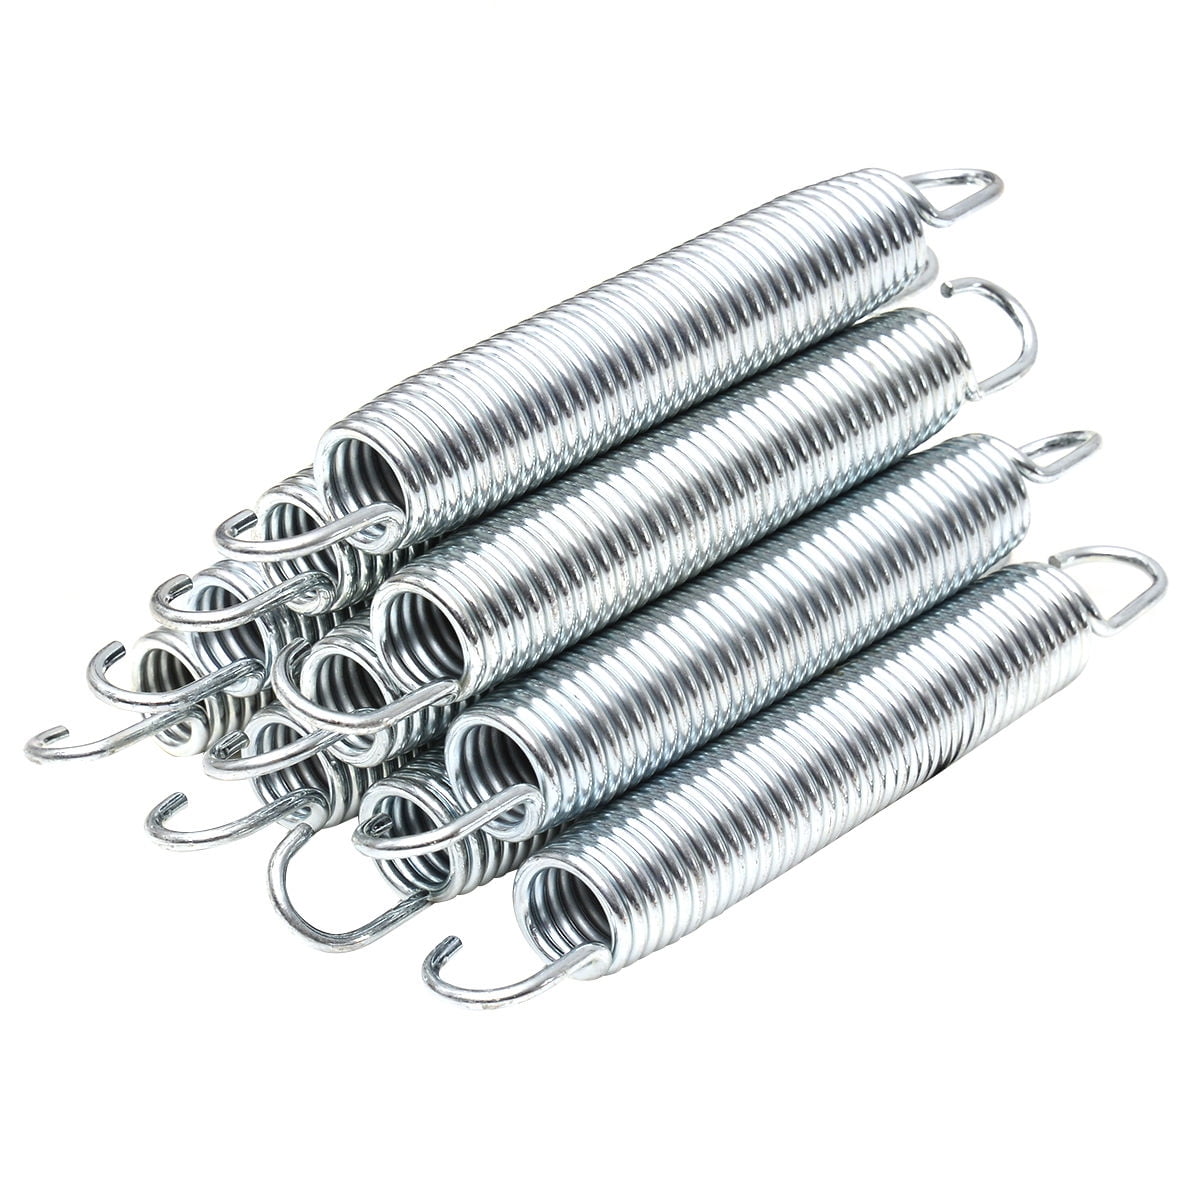 HAPPYGRILL 7 Trampoline Springs Set Galvanized Steel Heavy-Duty Replacement 20 PCS 1 Pack 